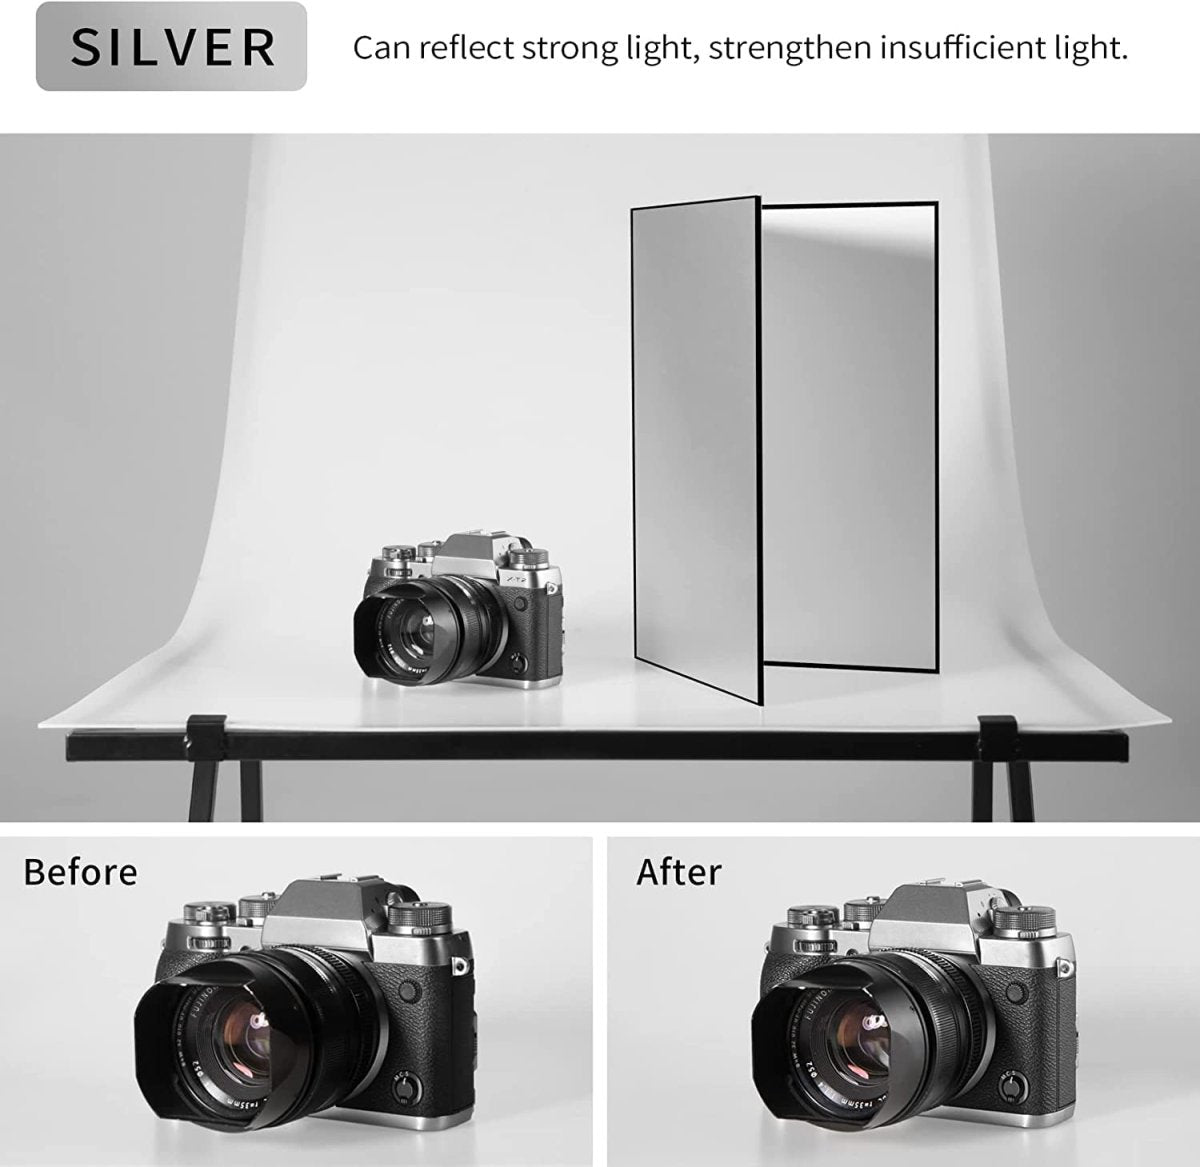 3 in 1 Light Reflector For Photography (29x42cm) Foldable Black White Silver Photo Background Support Equipment- #Royalkart#reflector